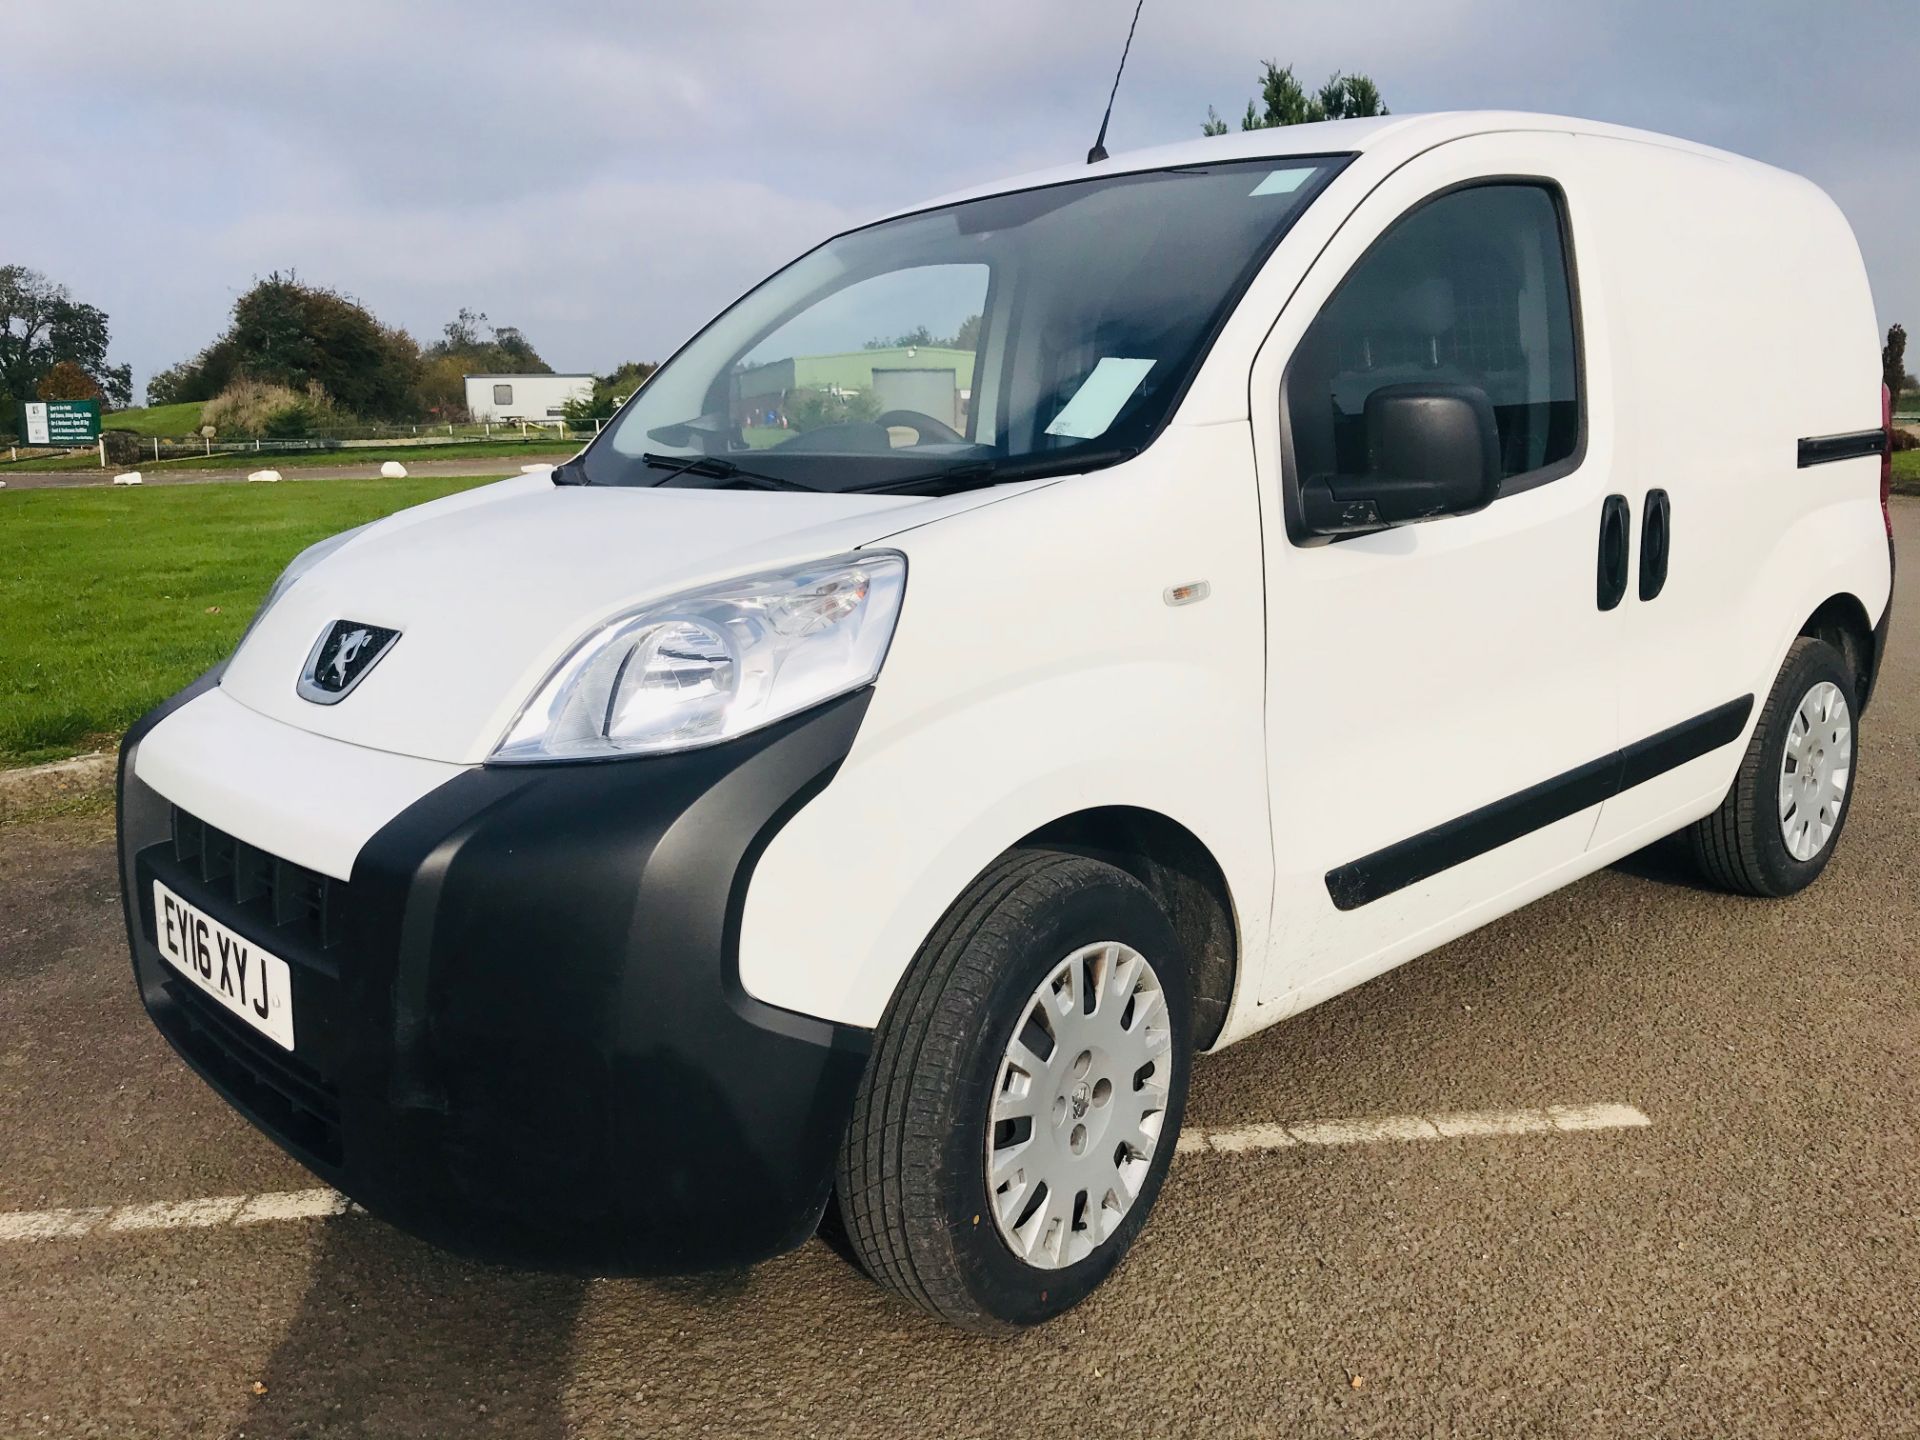 (ON SALE) PEUGEOT BIPPER HDI "PROFESSIONAL" 16 REG - 1 KEEPER - AIR CON - GREAT SPEC - LOOK!!!! - Image 6 of 23